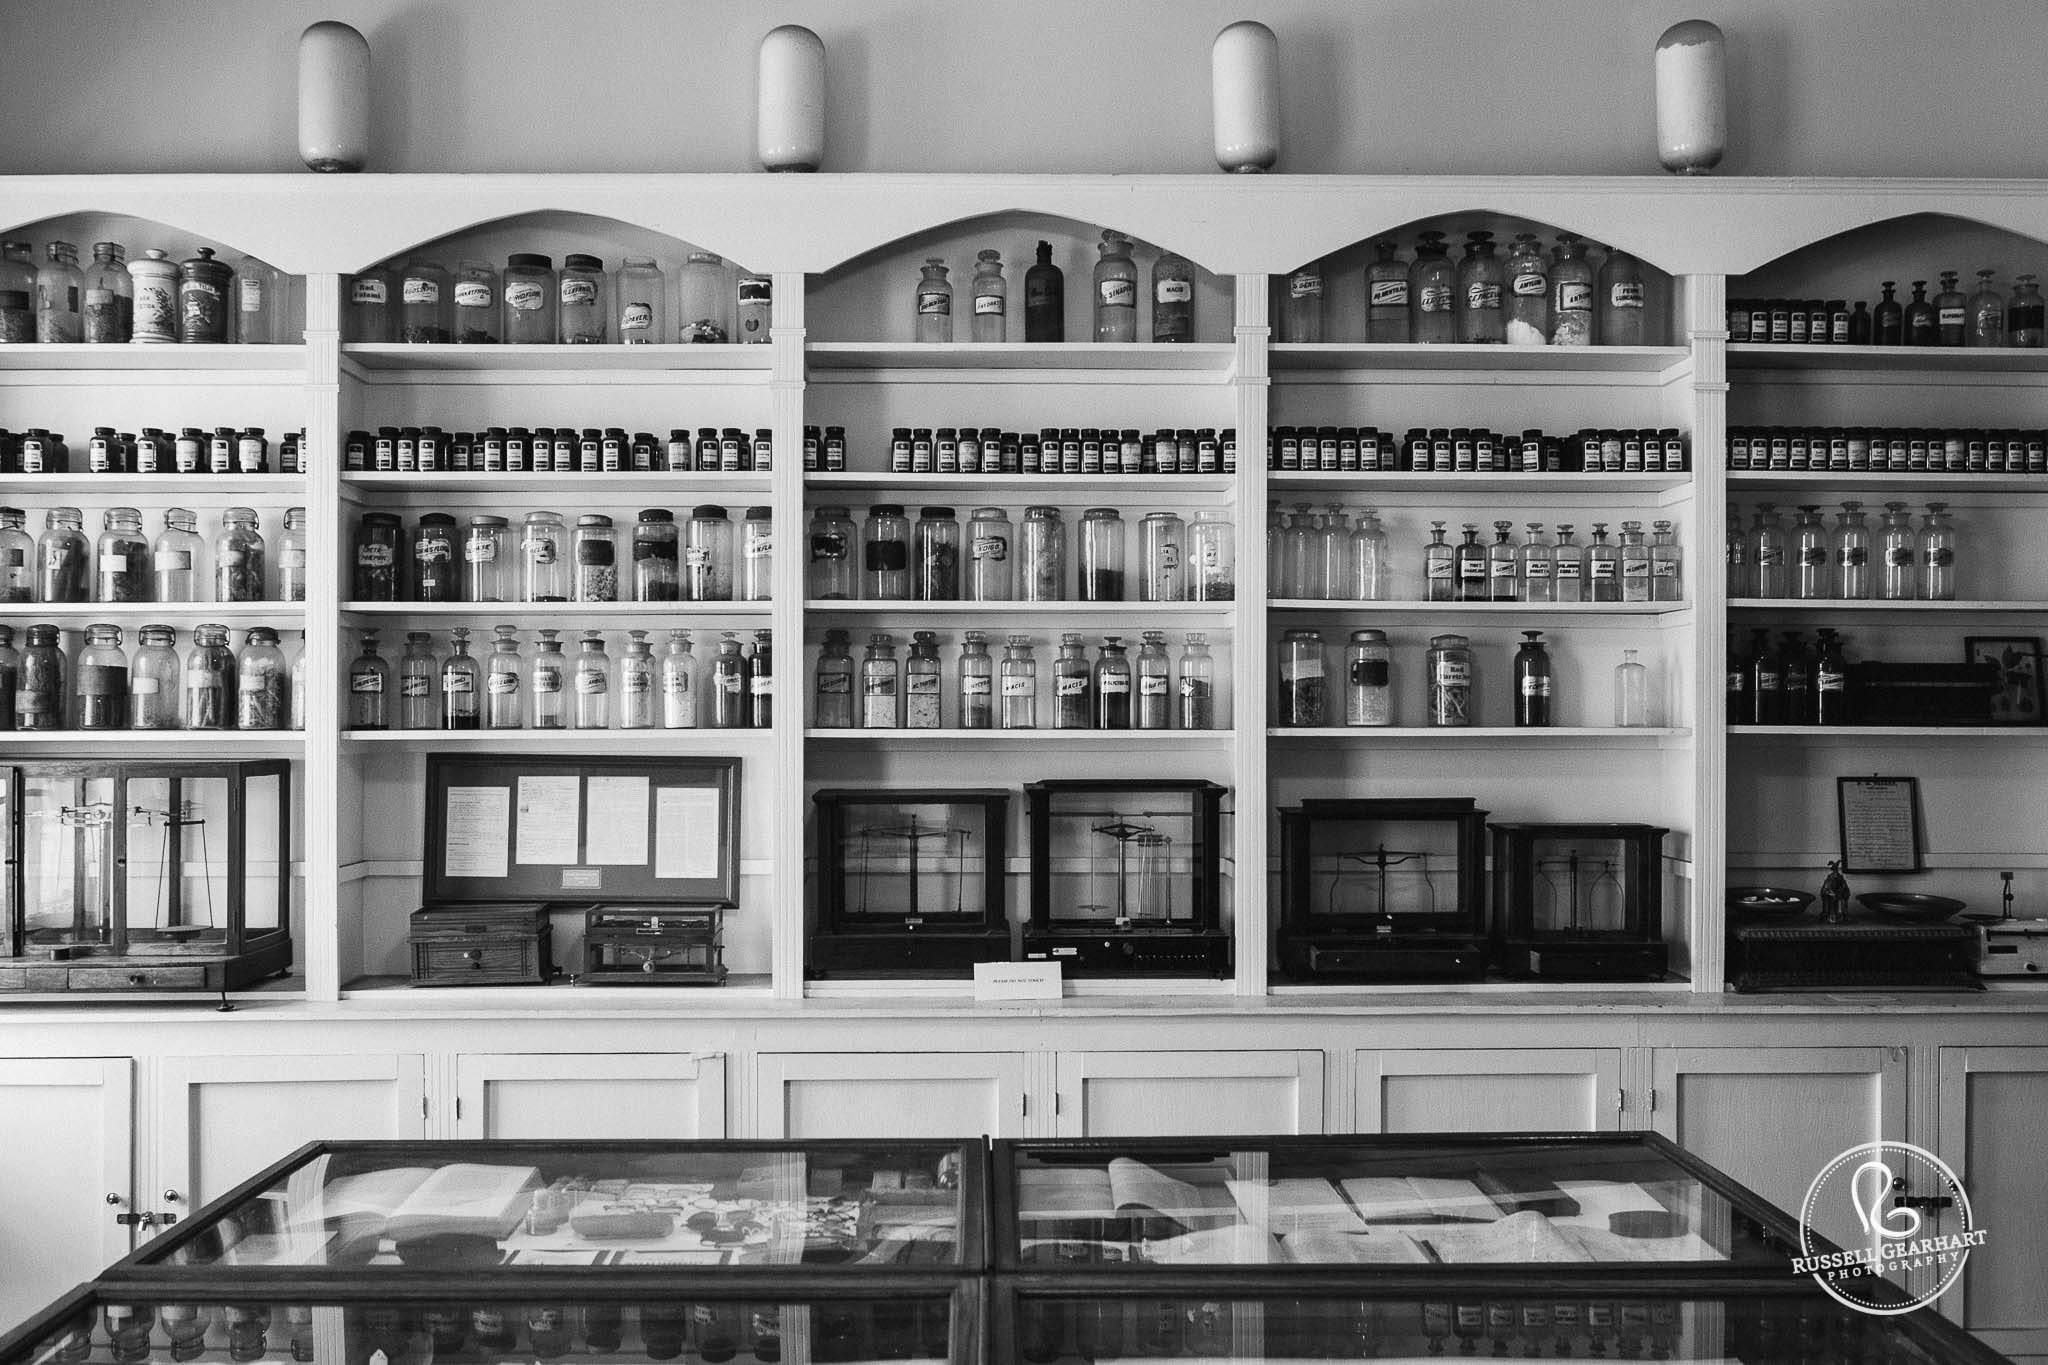 New Orleans Pharmacy Museum - New Orleans Honeymoon – Russell Gearhart Photography – www.gearhartphoto.com